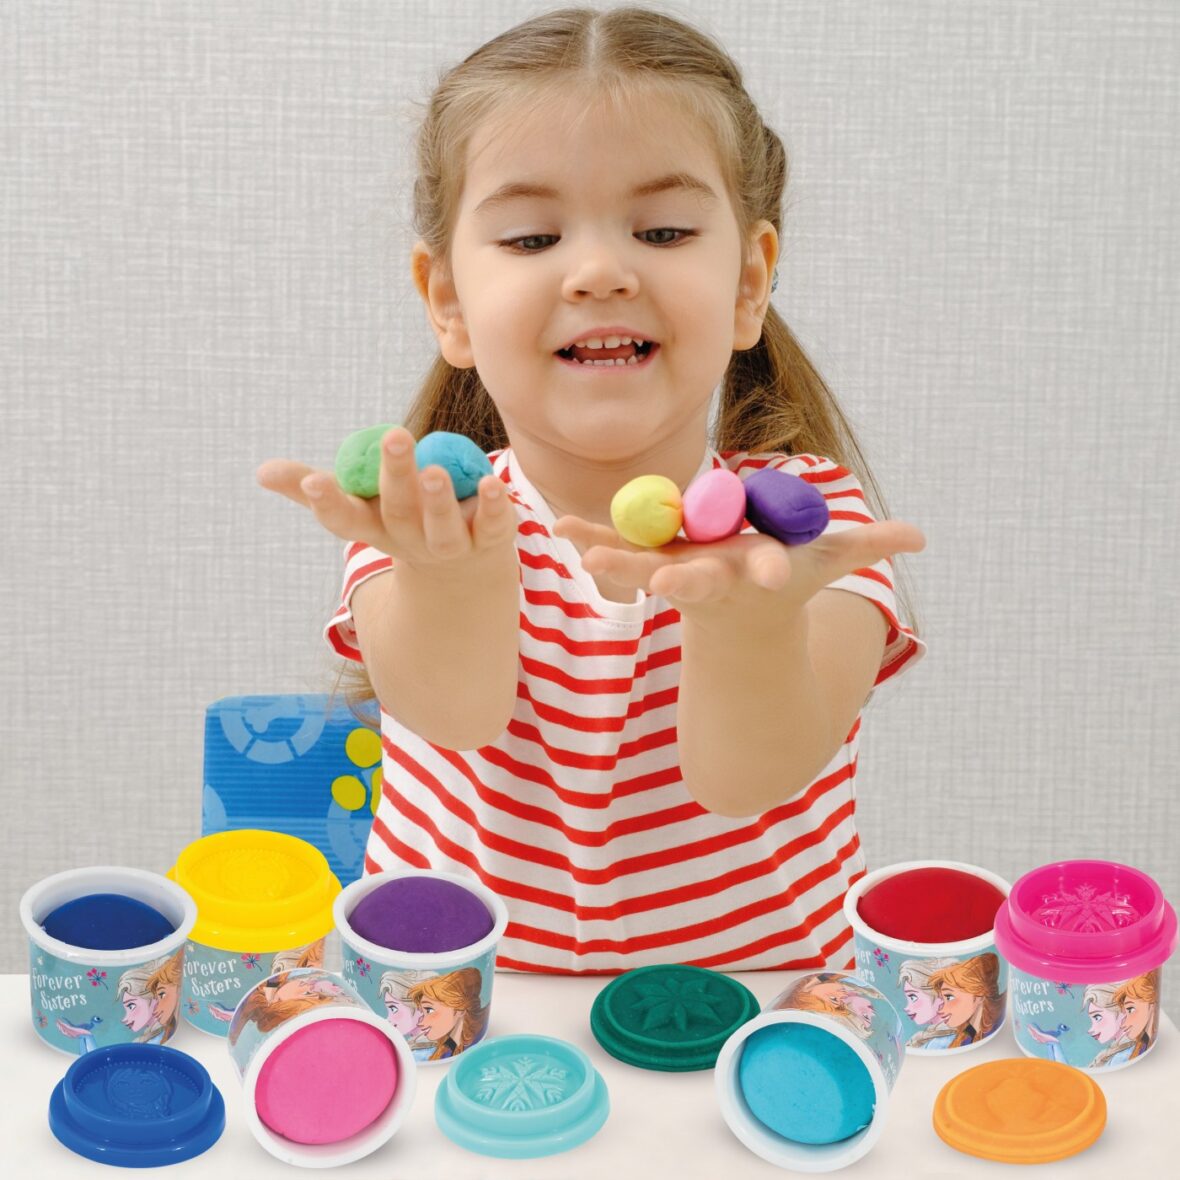 little smiling baby girl in striped T-shirt plays with colored plasticine, play dough at home